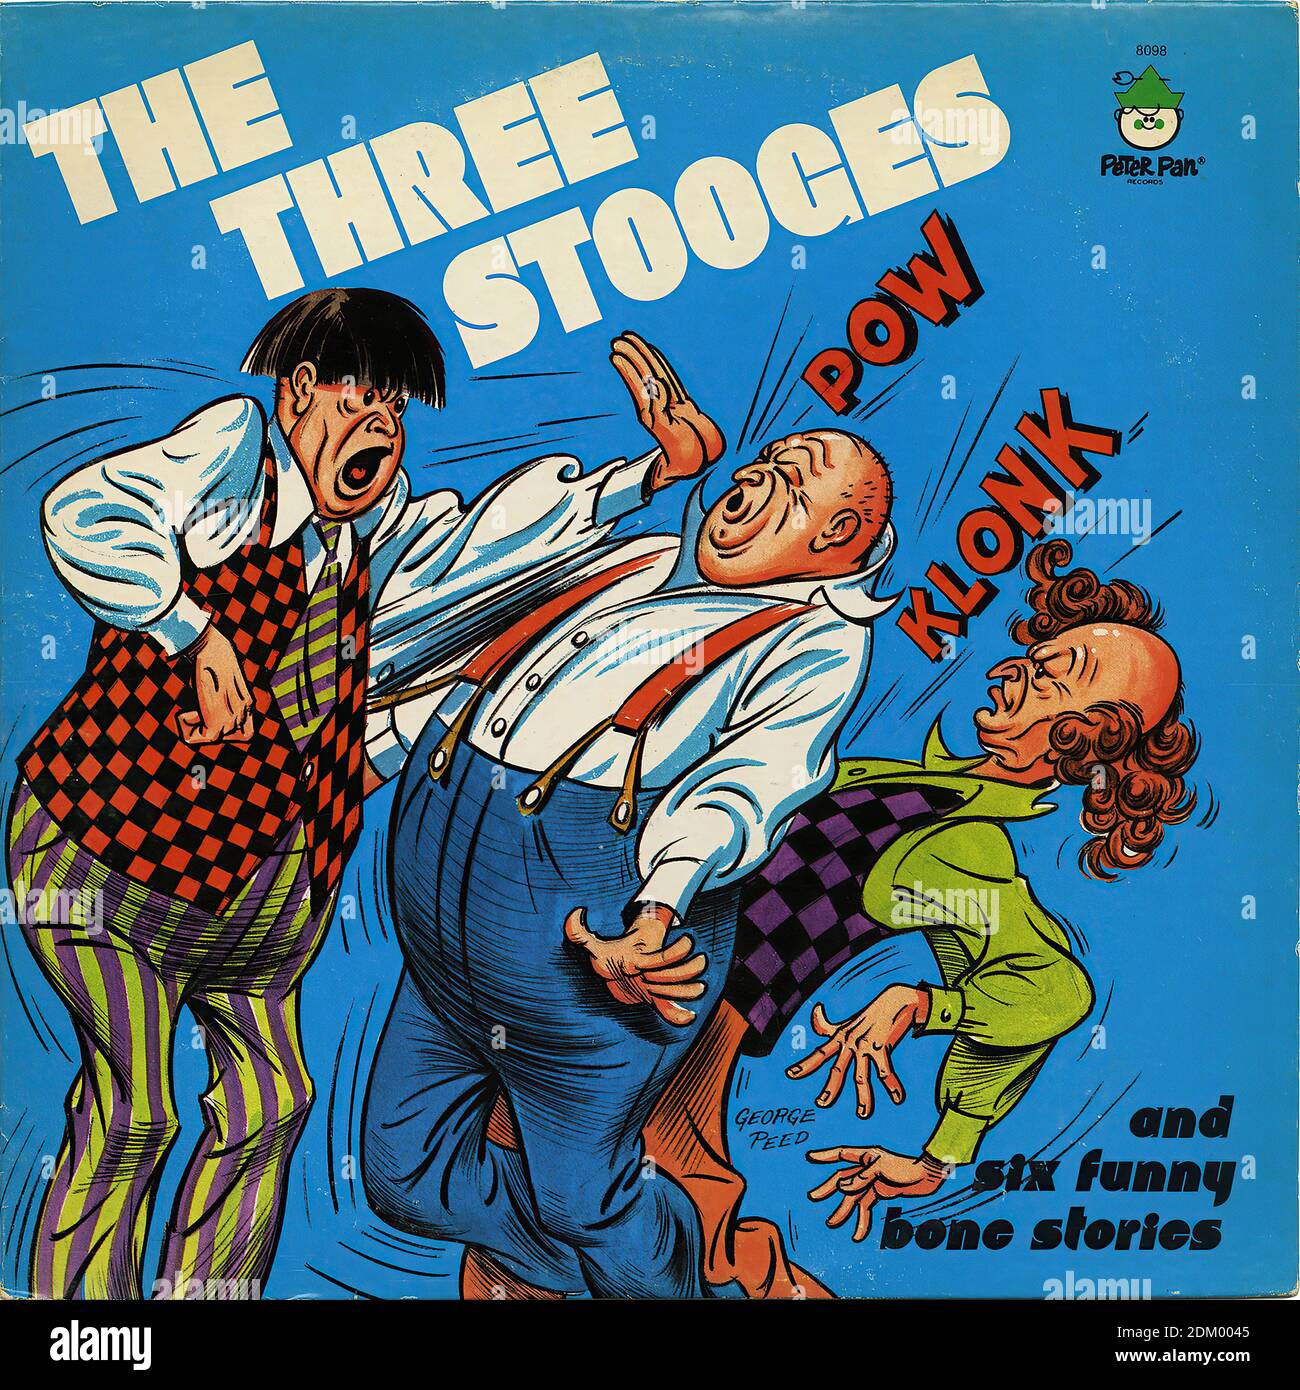 The Three Stooges and Six Funny Bone Stories - Vintage Record Cover Stock Photo